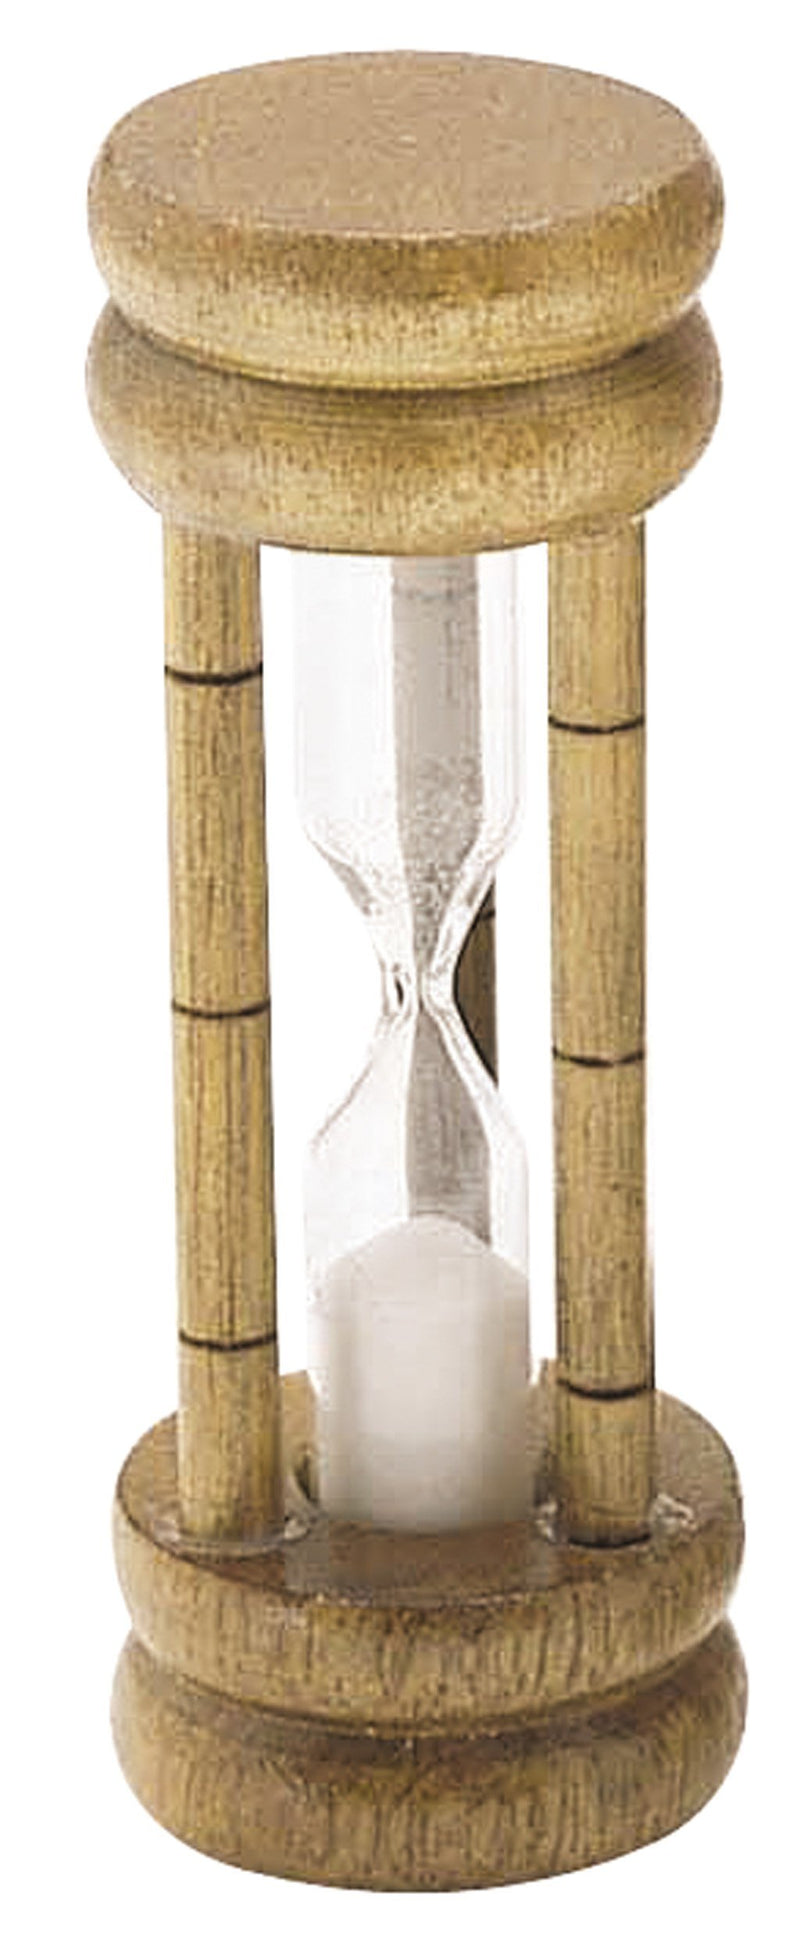 Kitchencraft Traditional Three Minute Sand Egg Timer, Blister Packed